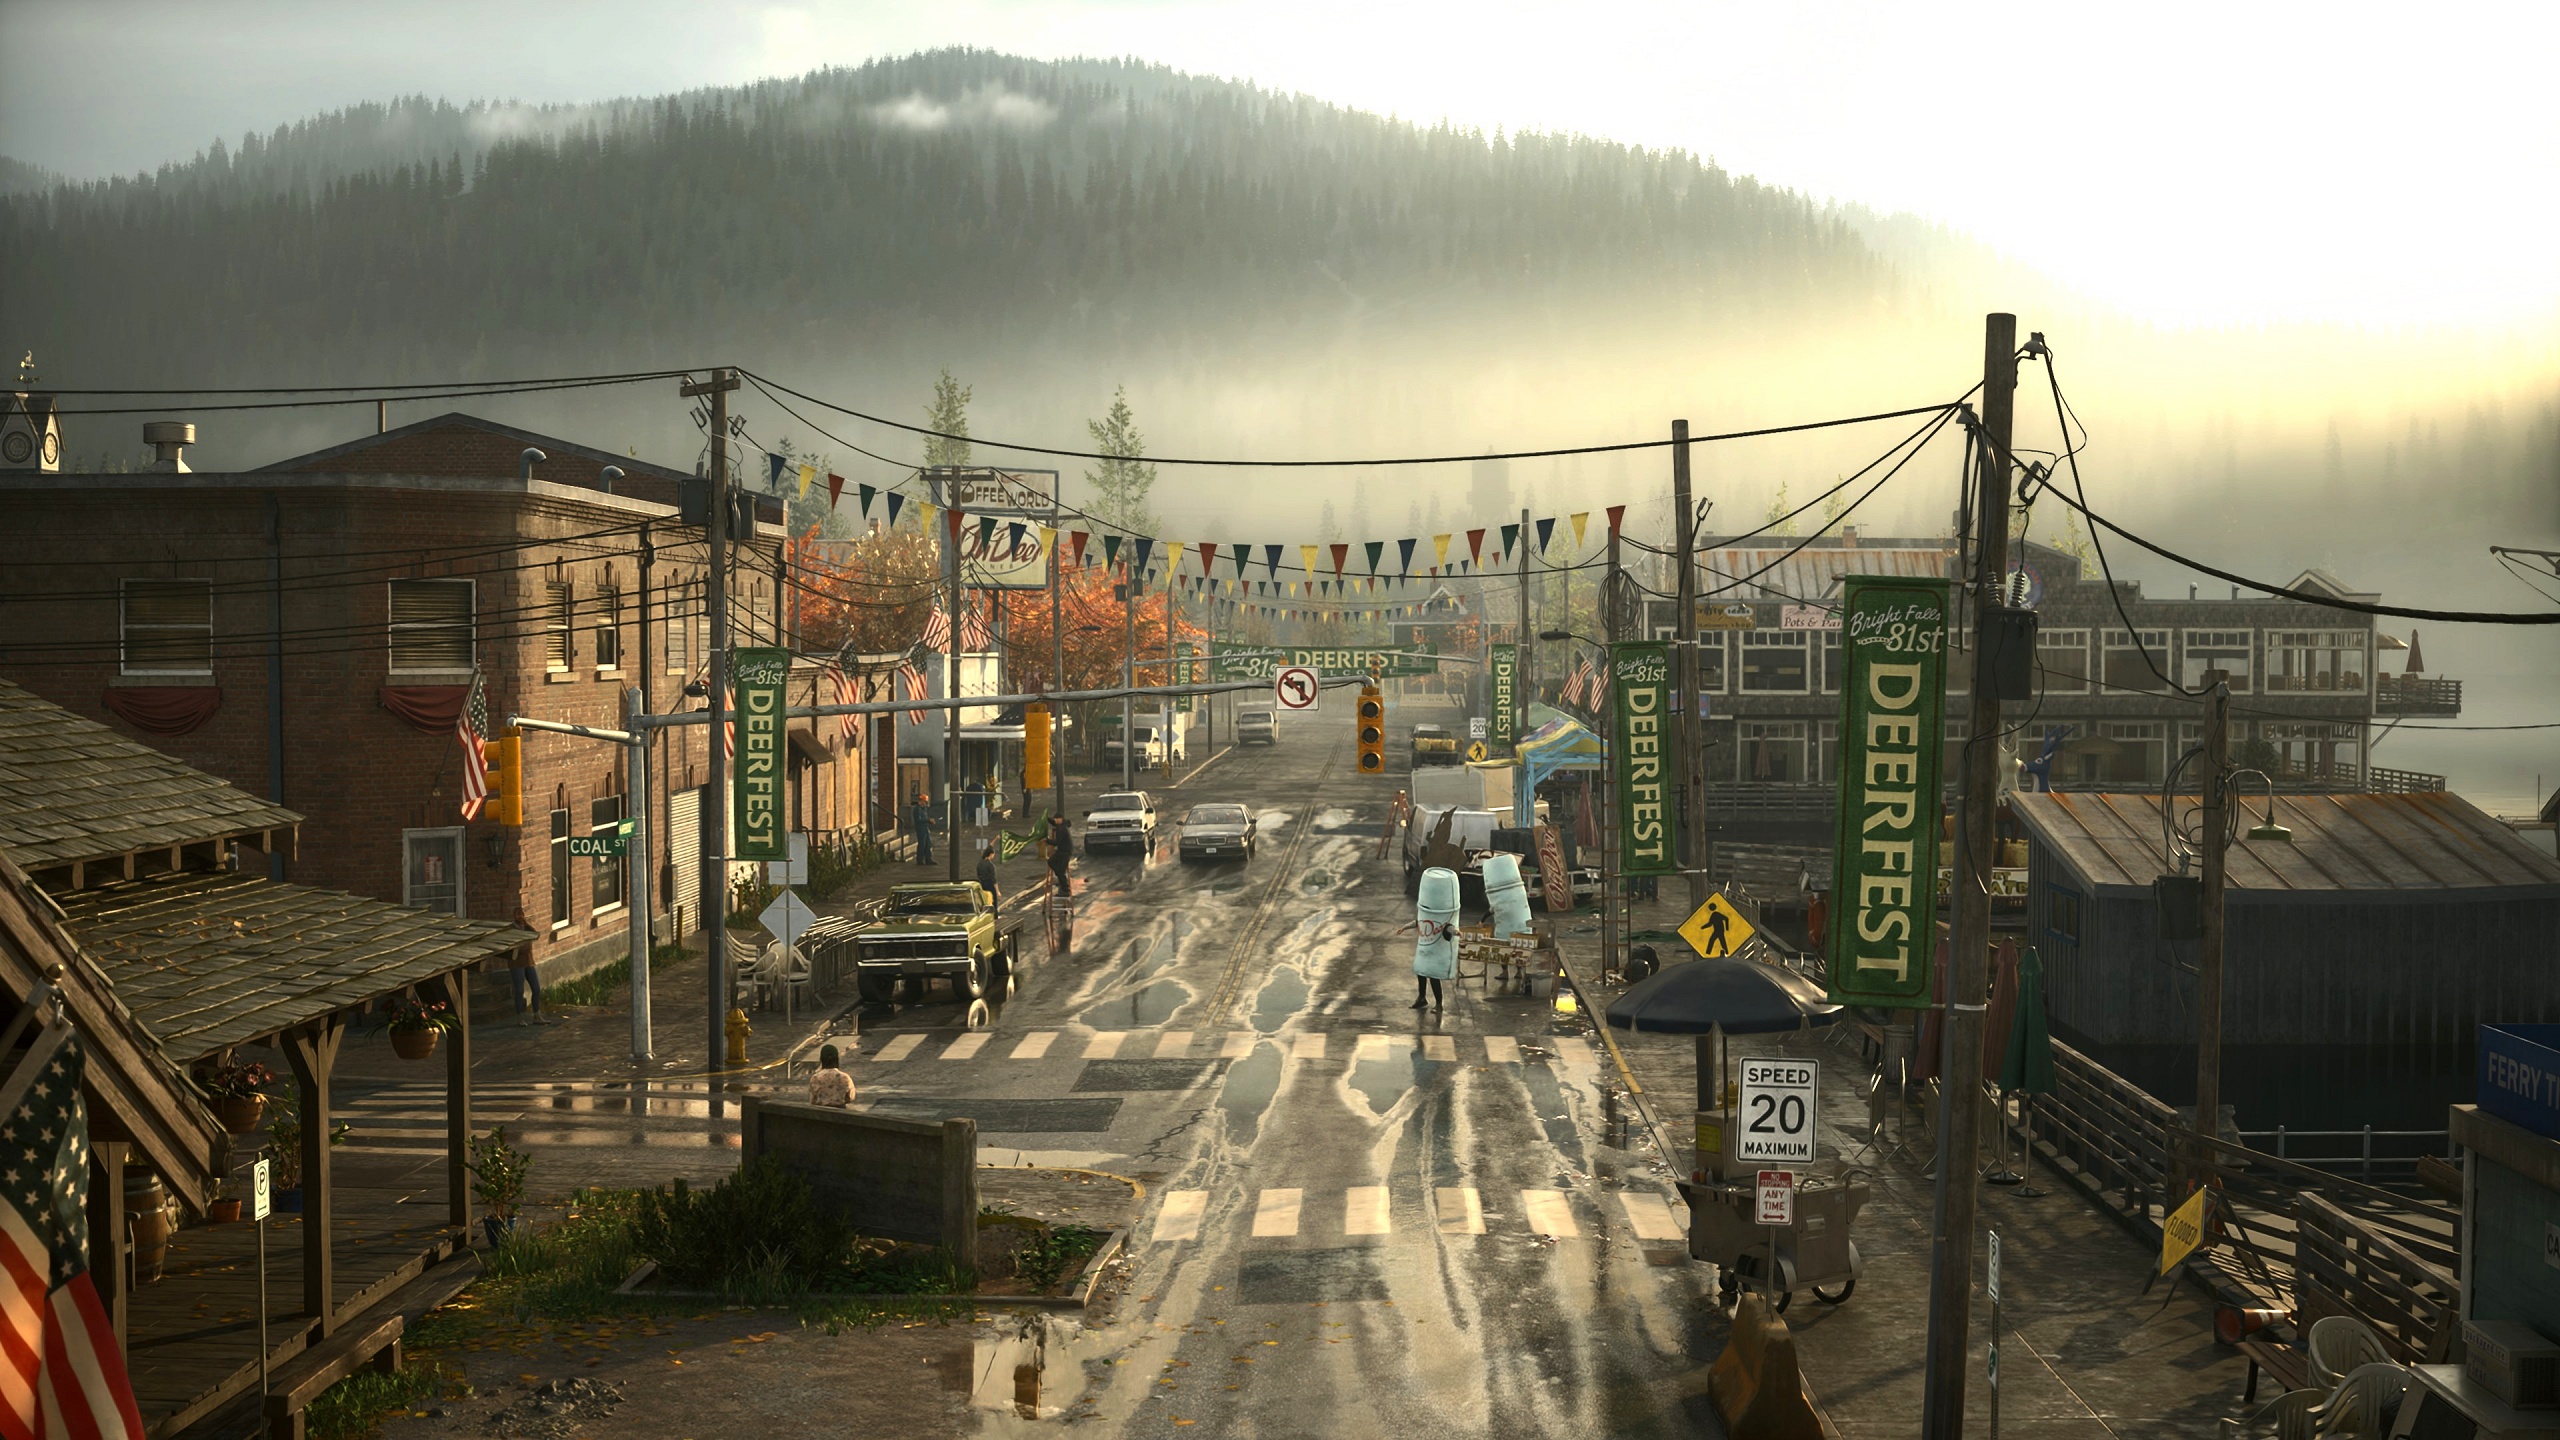 For such a gorgeous game Alan Wake 2 runs surprisingly well on